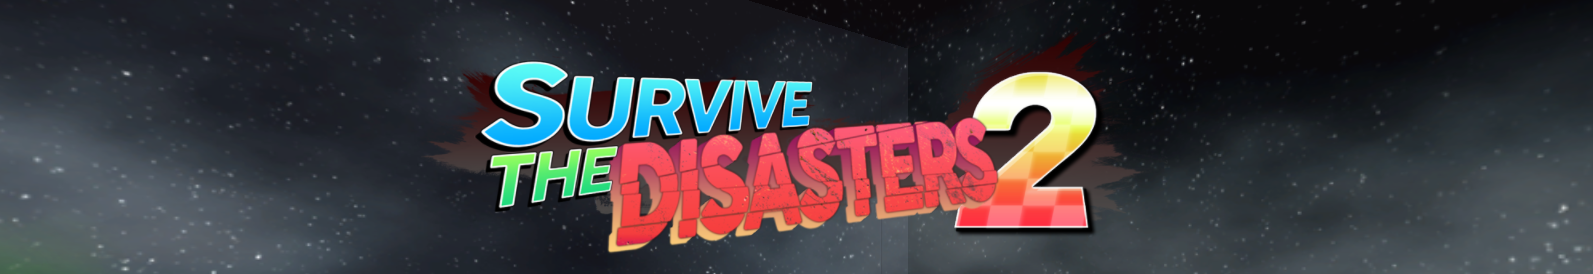 Review Survive The Disasters 2 Survive The Disasters 2 Is A Sequal To By Euik Impormasyon Medium - roblox survive the disasters